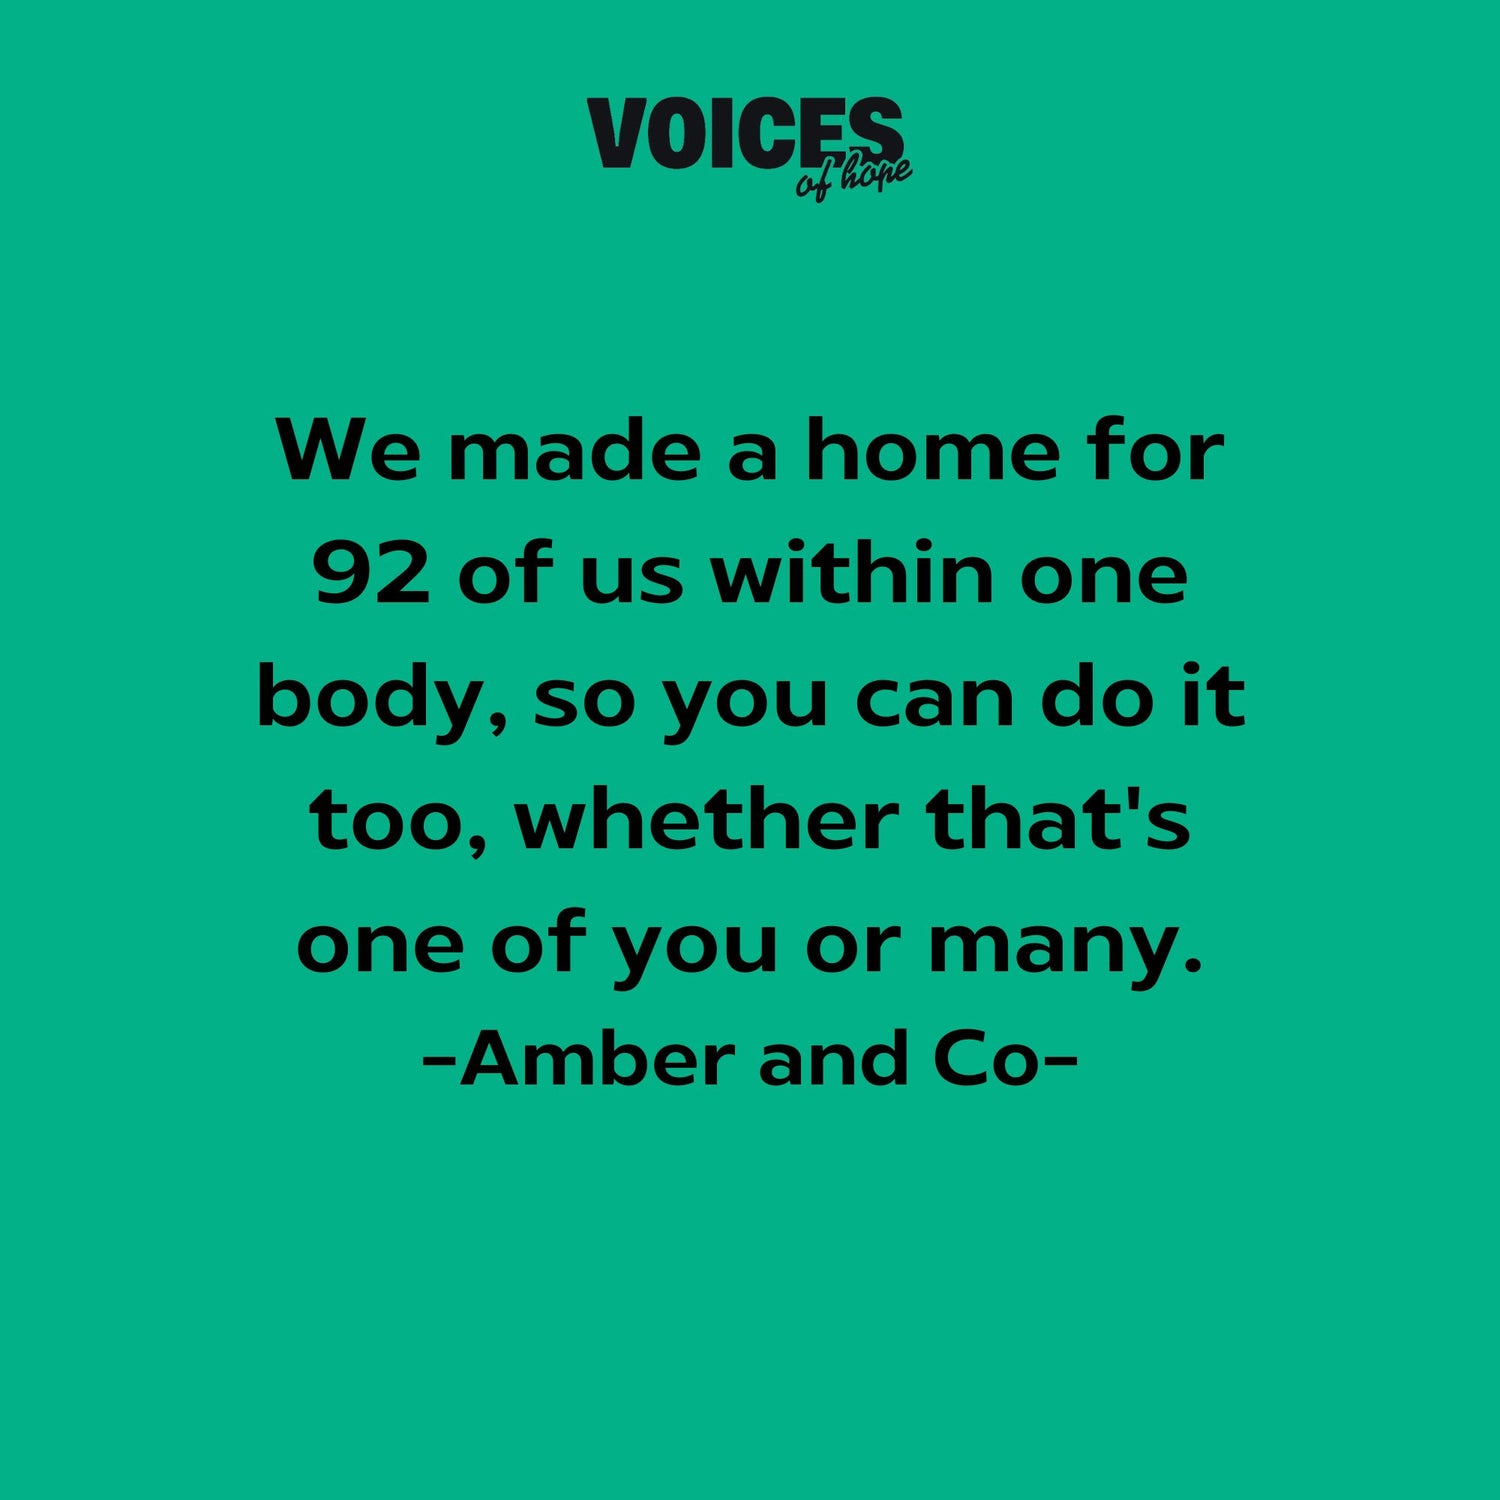 Green background with black writing that reads: "we made a home for 92 of us within one body, so you can do it too, whether that's one of you or many. Amber and Co."